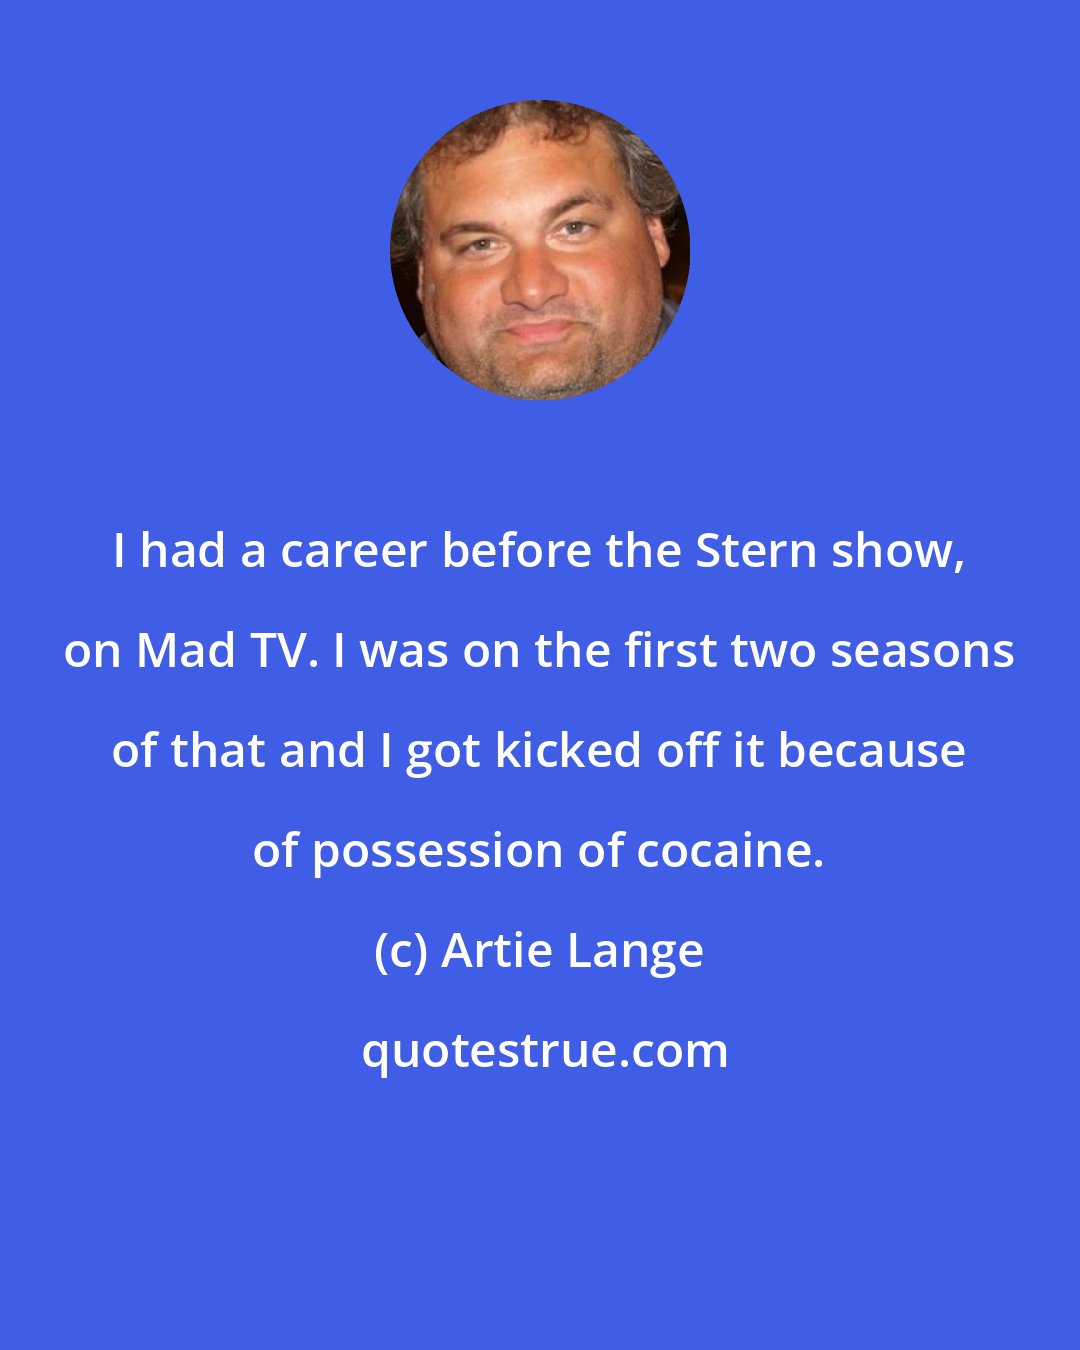 Artie Lange: I had a career before the Stern show, on Mad TV. I was on the first two seasons of that and I got kicked off it because of possession of cocaine.